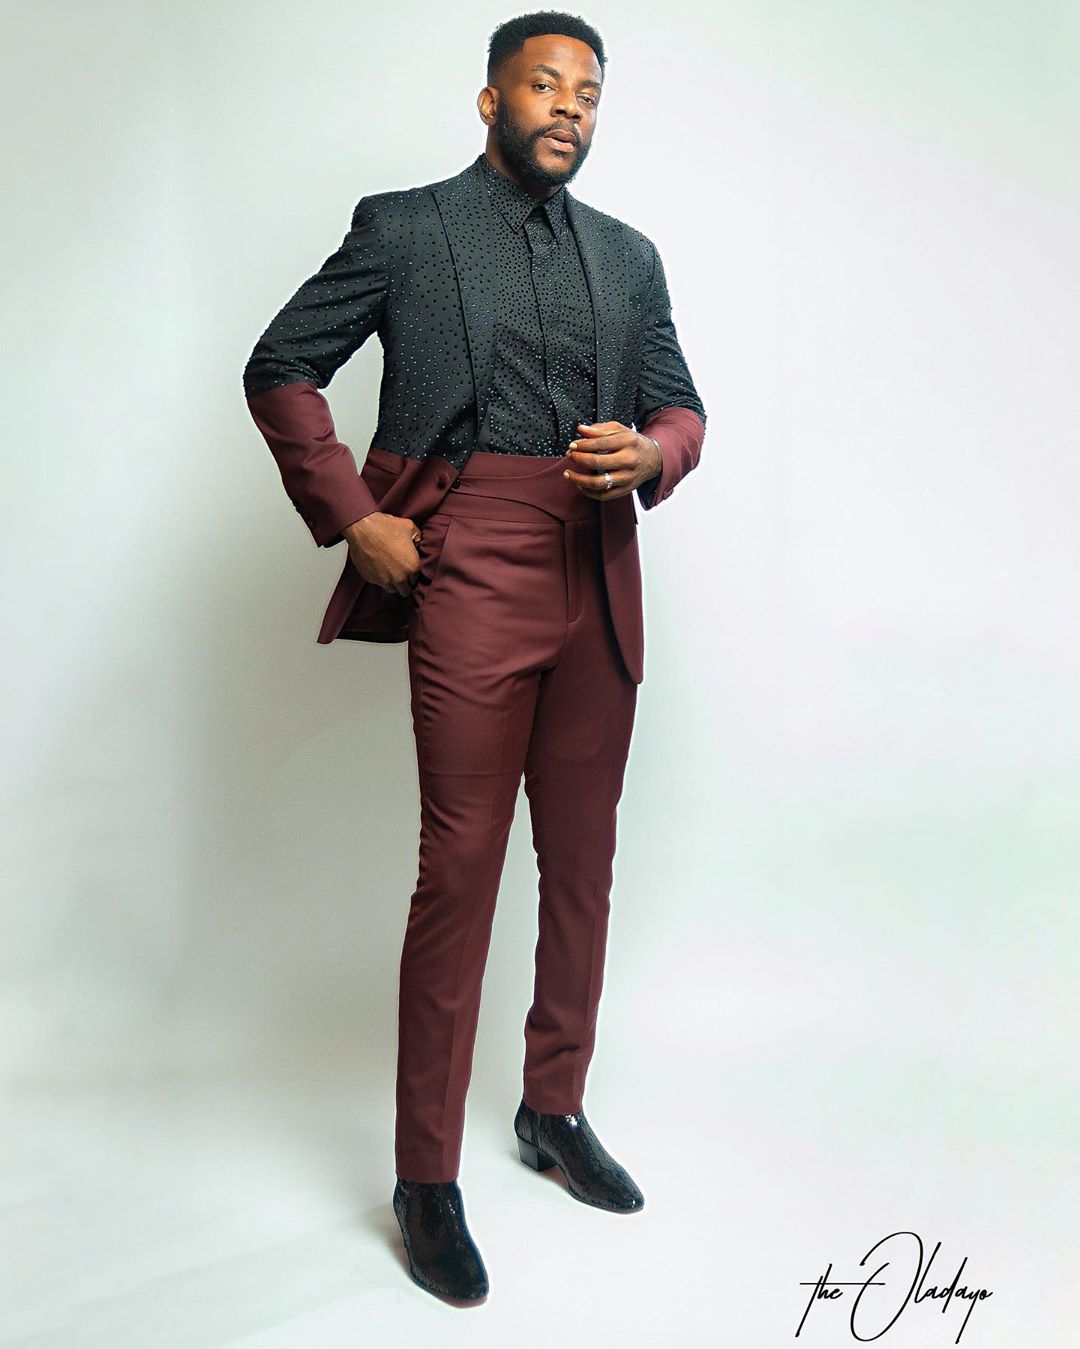 Top Men's Fashion Bloggers, Influencers & Celebs Came Through Slaying